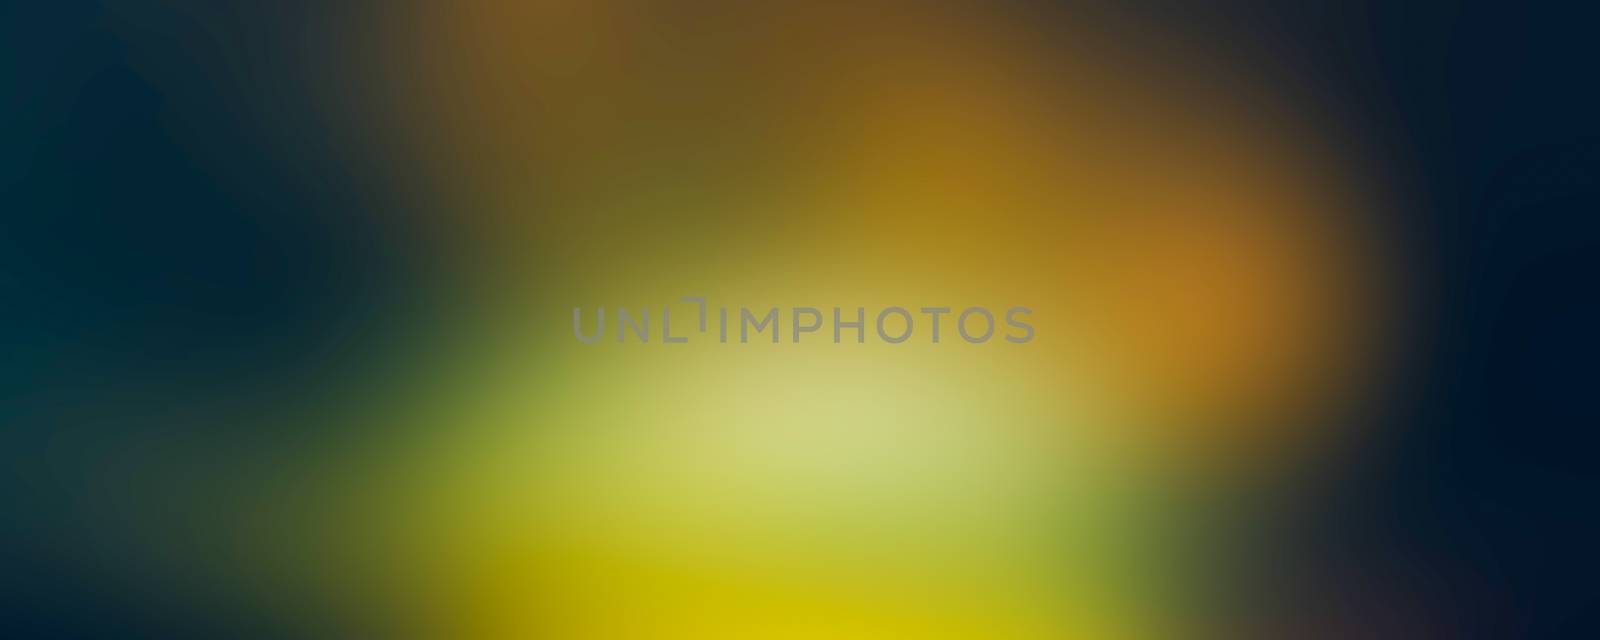 Abstract yellow brown soft blurred background. Canvas for any project